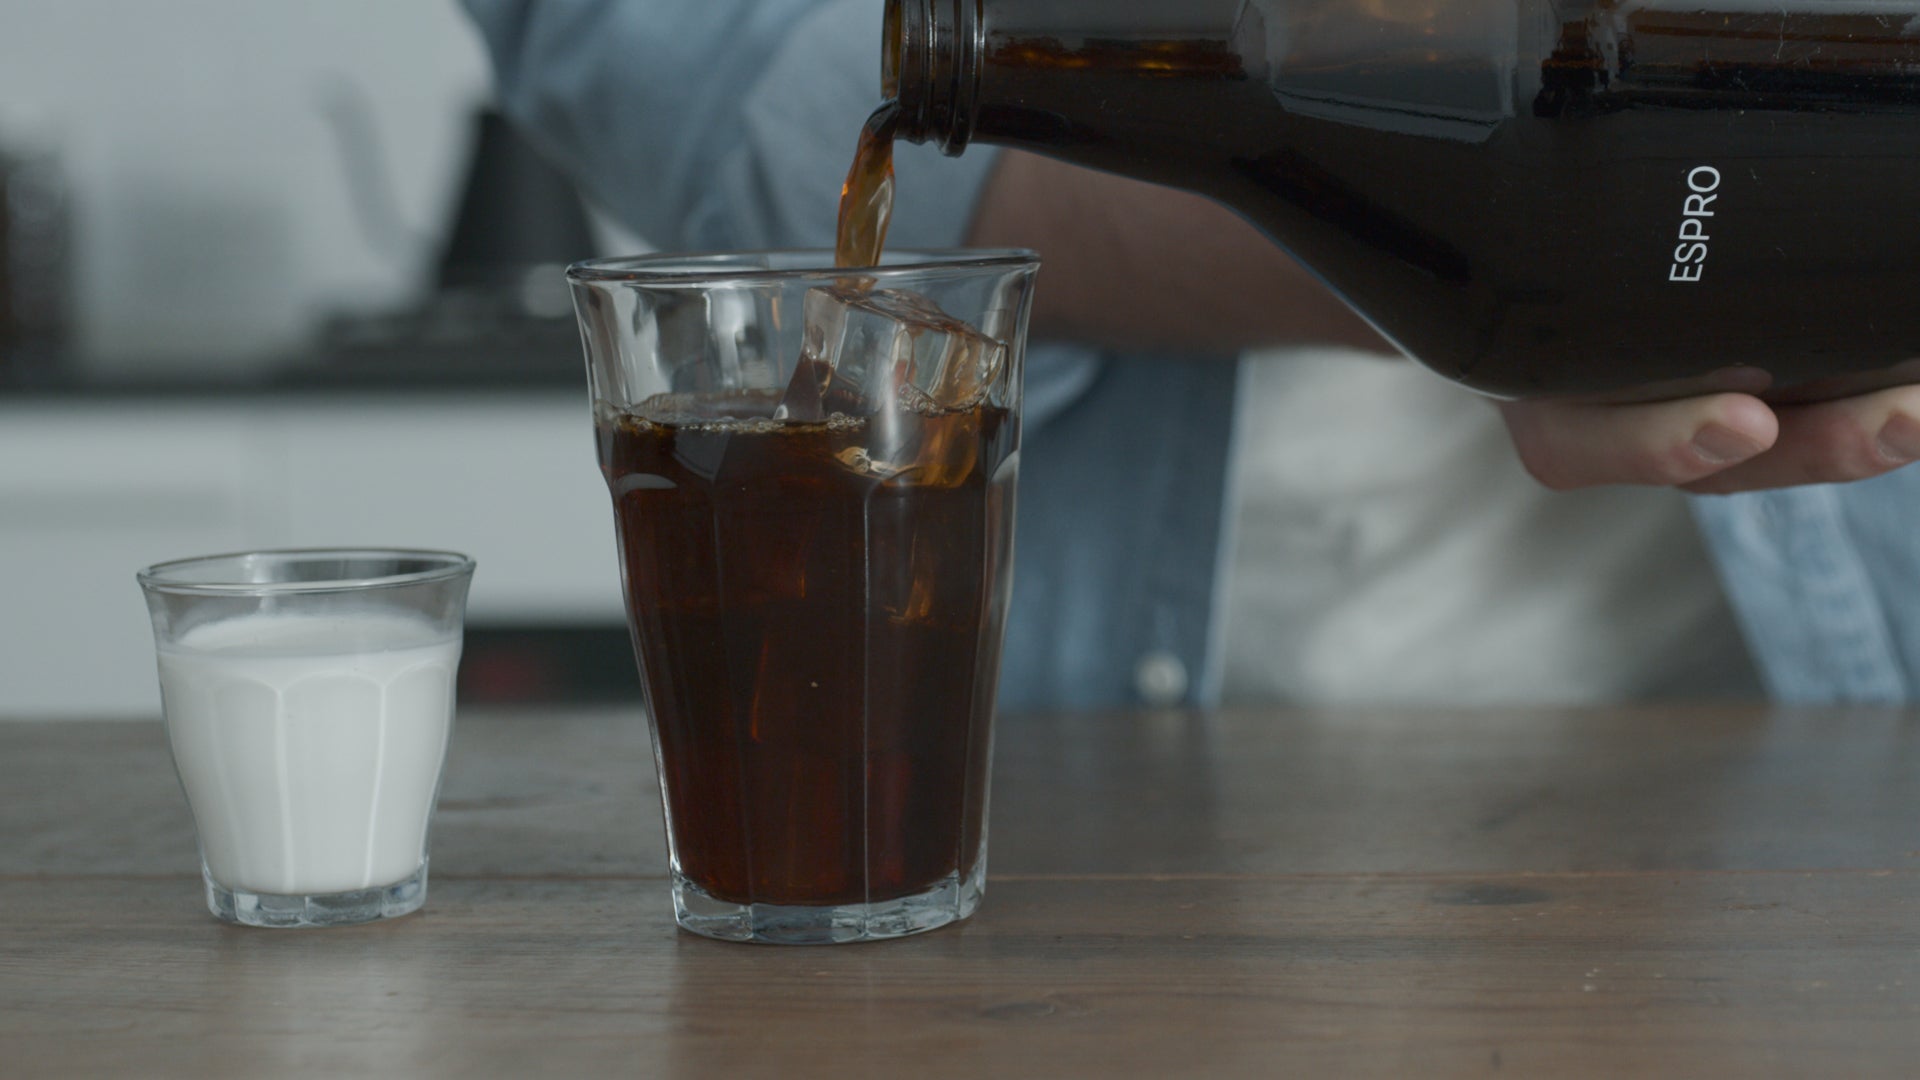 Welcome to Cold Brew 101: Your crash course